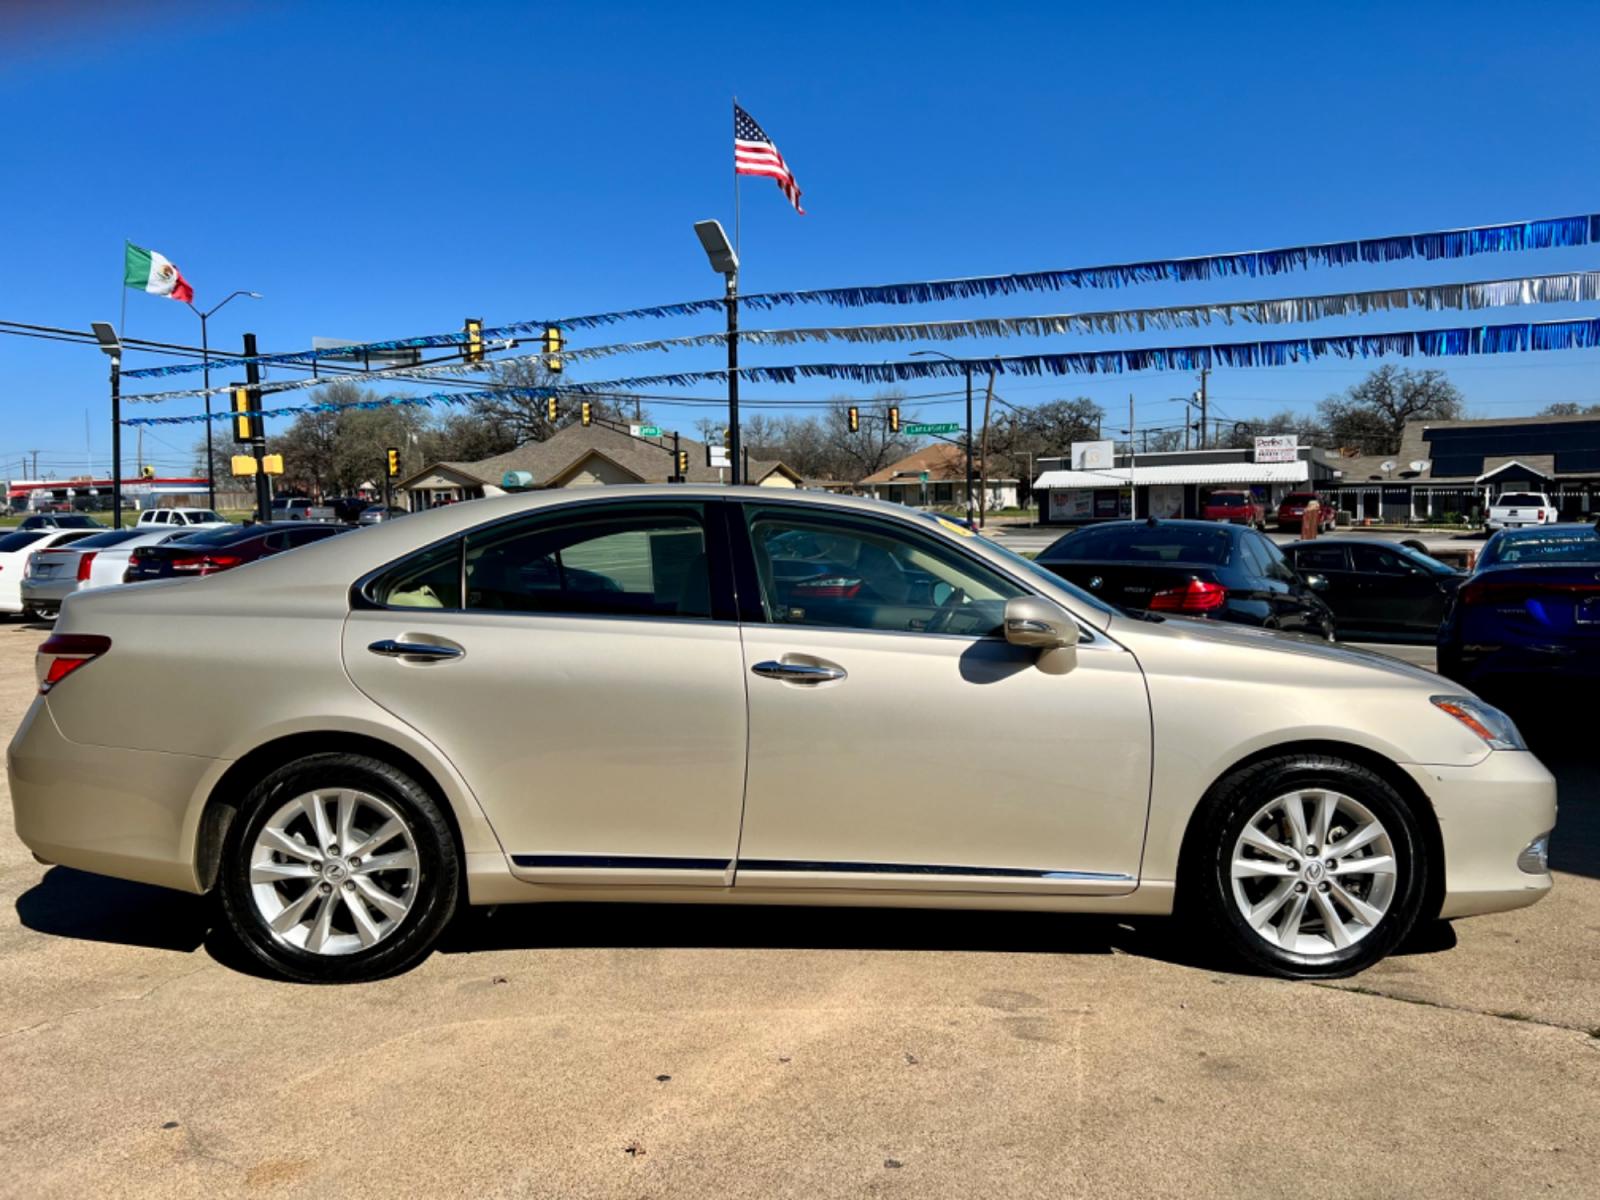 2011 GOLD LEXUS ES 350 (JTHBK1EG9B2) , located at 5900 E. Lancaster Ave., Fort Worth, TX, 76112, (817) 457-5456, 0.000000, 0.000000 - This is a 1 OWNER, 2011 LEXUS ES 350 4 DOOR SEDAN that is in excellent condition. There are no dents or scratches. The interior is clean with no rips or tears or stains. All power windows, door locks and seats. Ice cold AC for those hot Texas summer days. It is equipped with a CD player, AM/FM radio - Photo #6